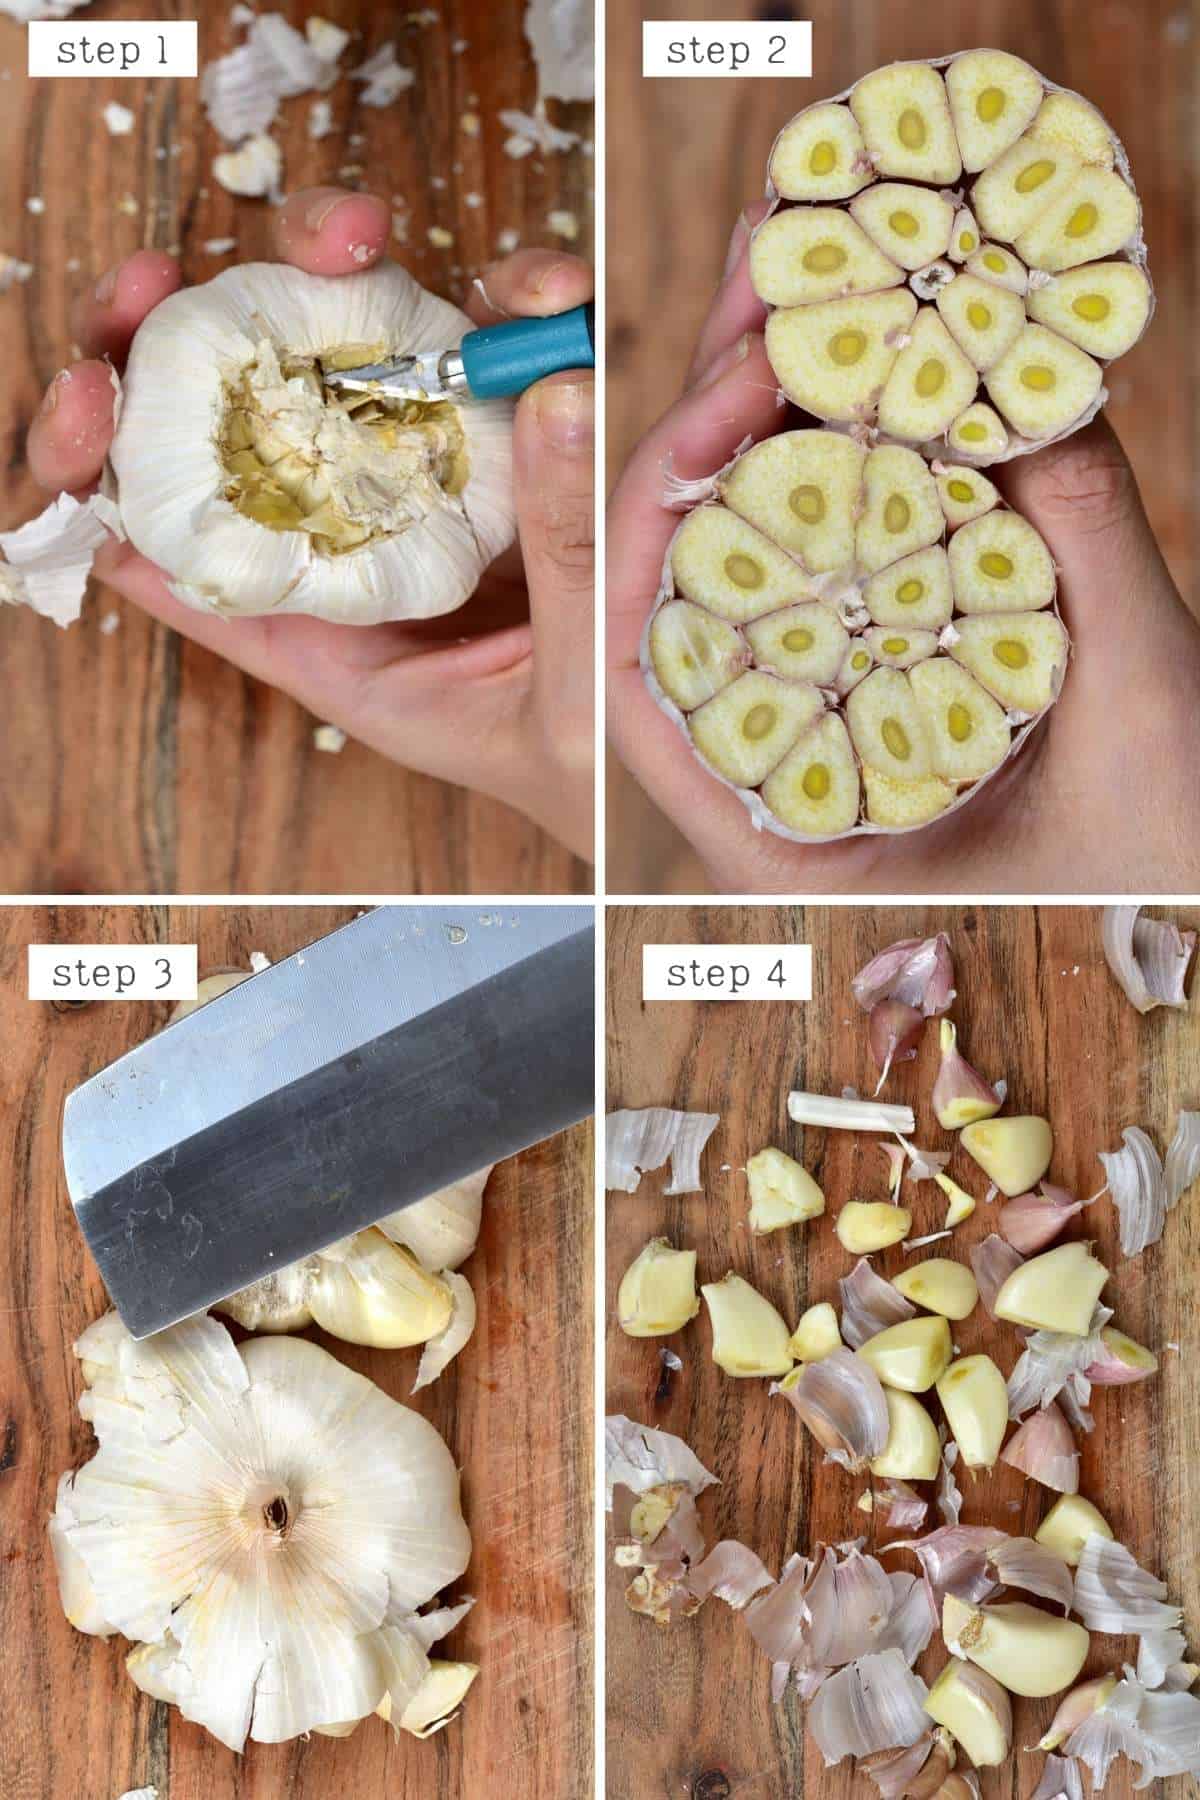 How to peel garlic - Method 2 by cutting through the middle variation